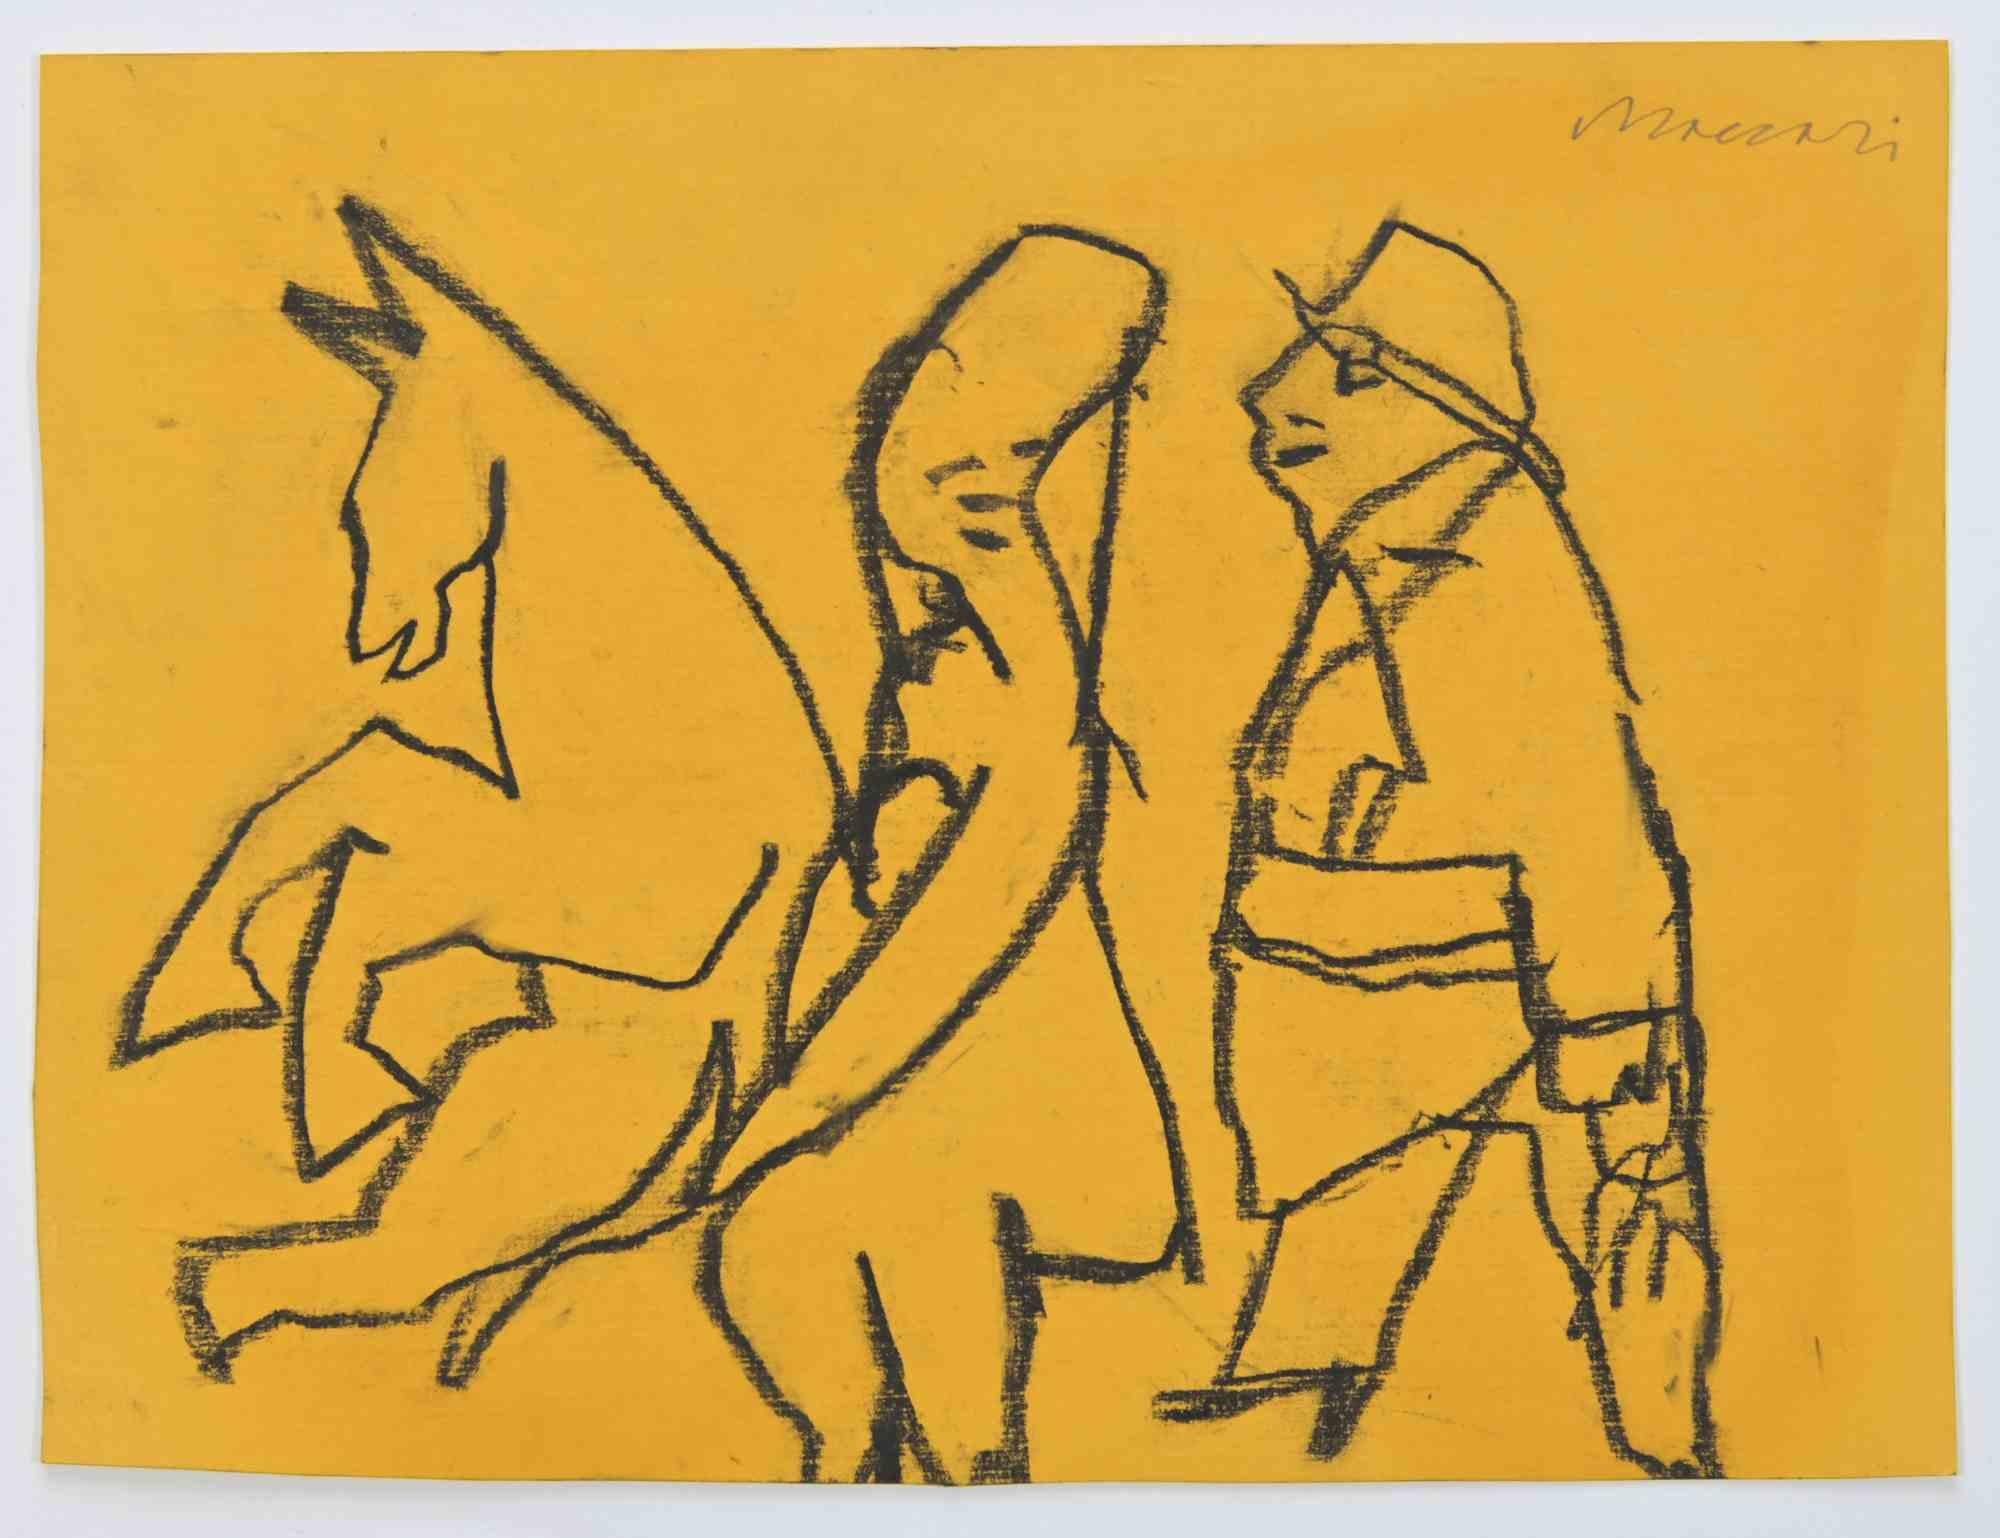 The Spouse and the Horse - Drawing by Mino Maccari - 1970s